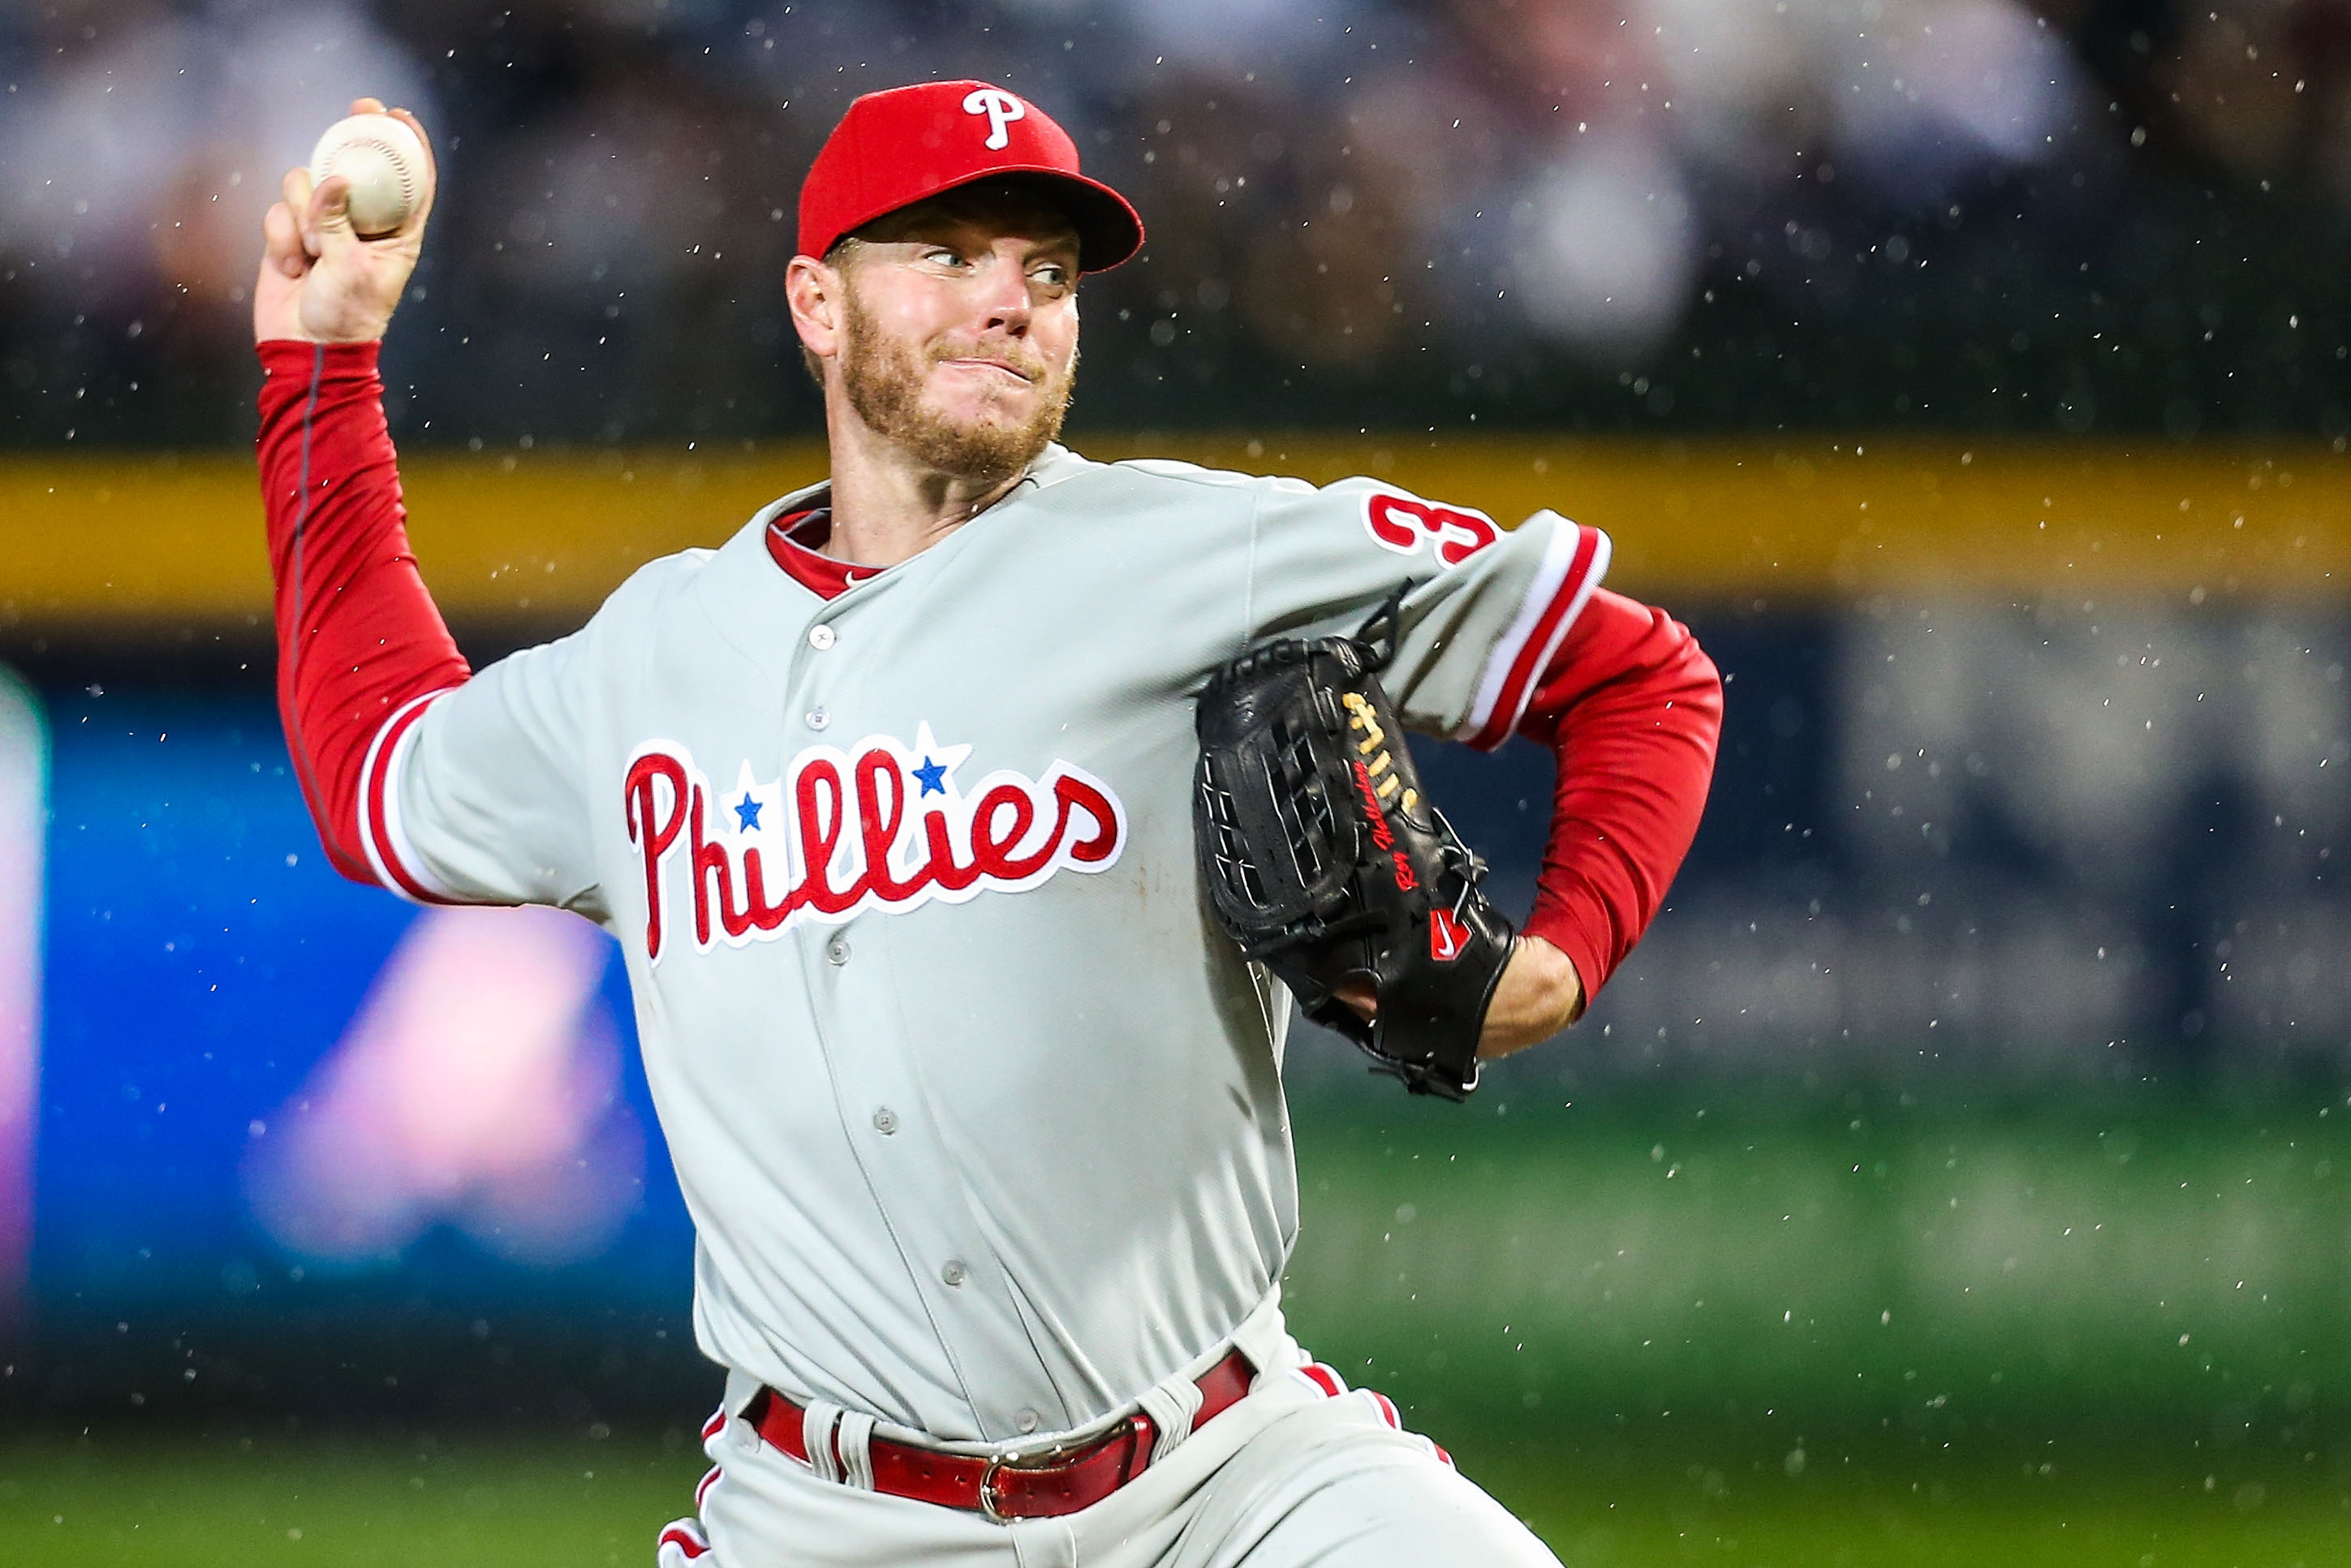 Roy Halladay will have lasting impact on Phils